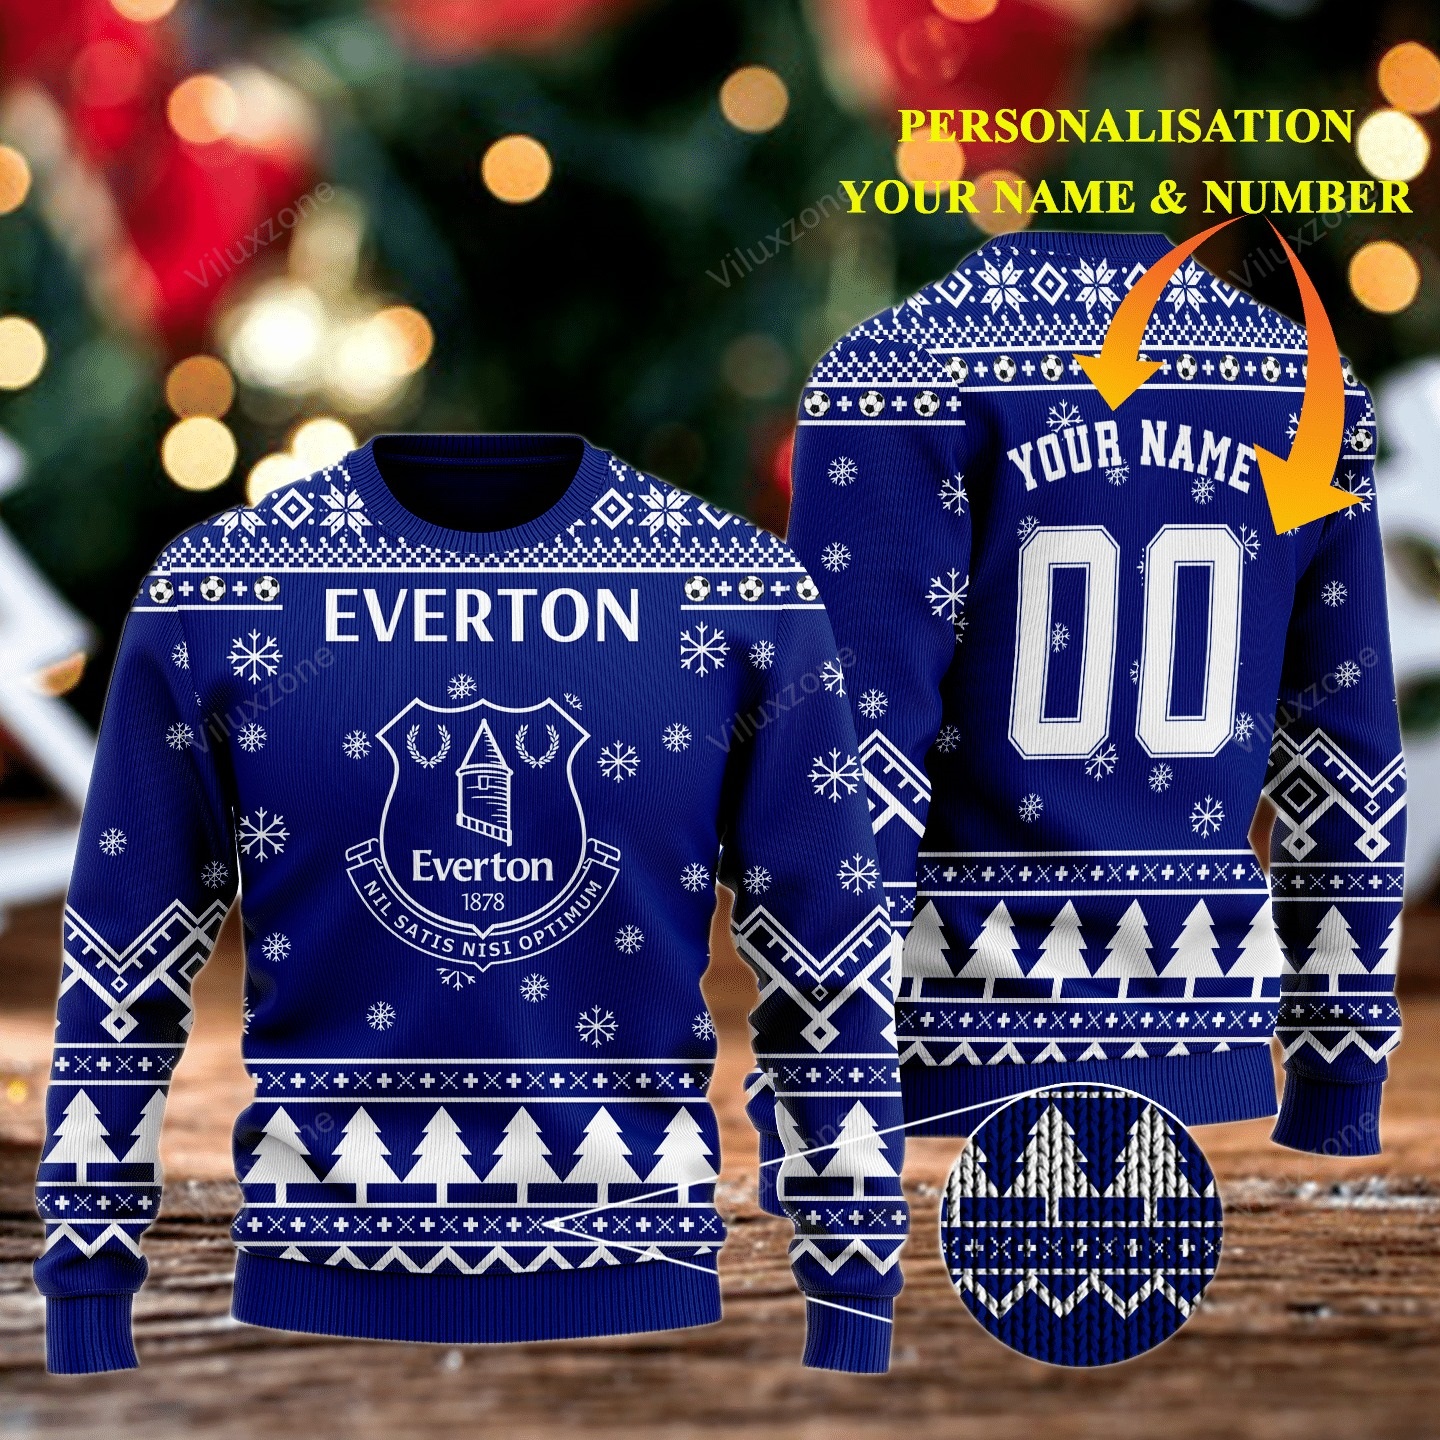 [ Amazing ] Everton FC personalized name and number 3d xmas sweater jumper – Saleoff 251121